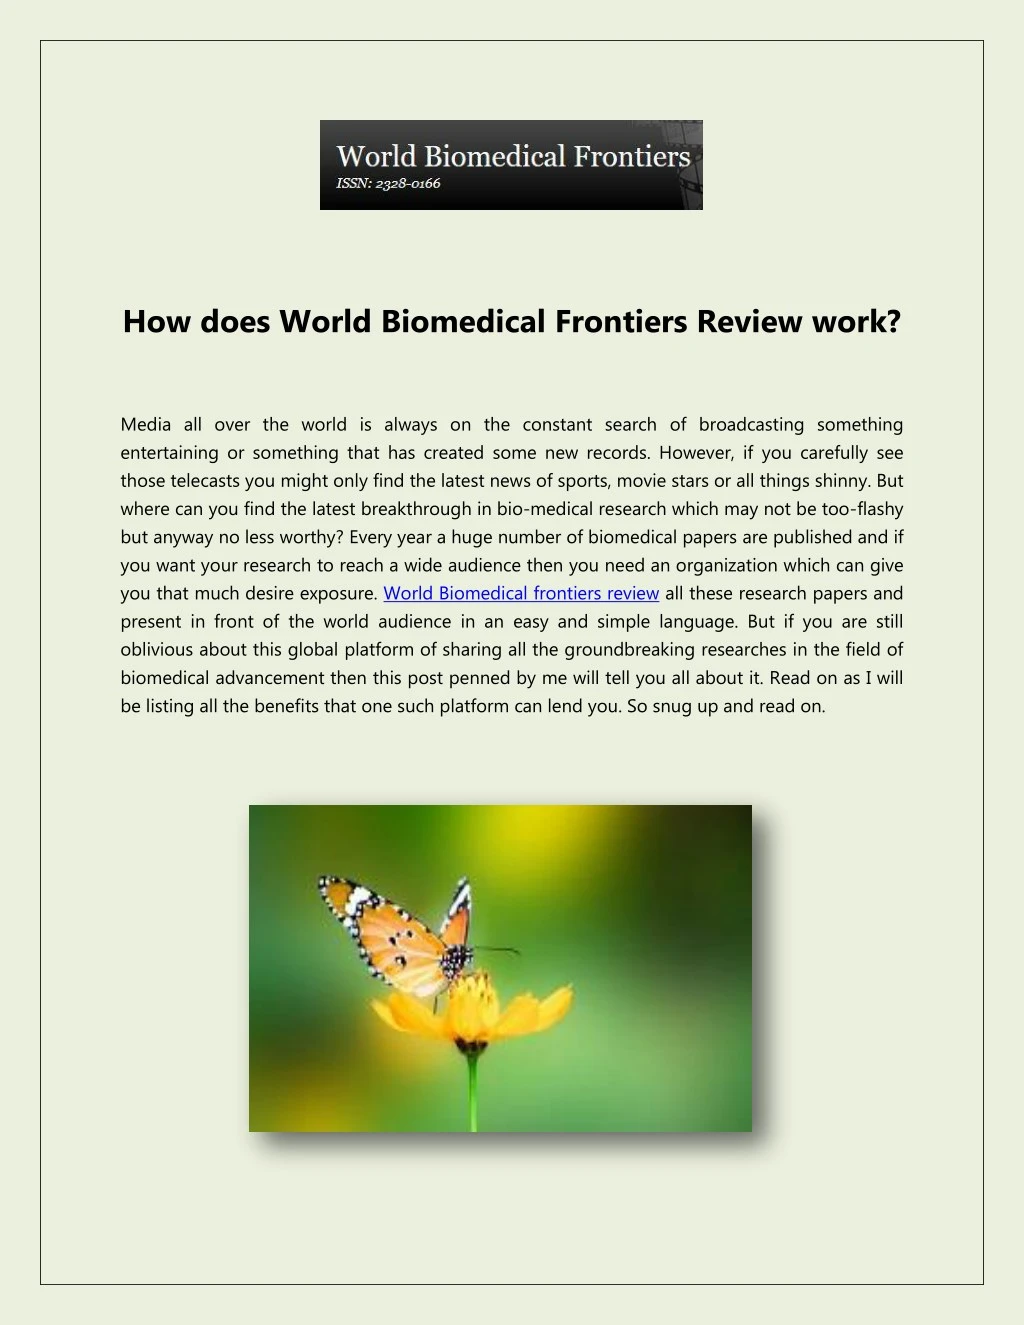 how does world biomedical frontiers review work